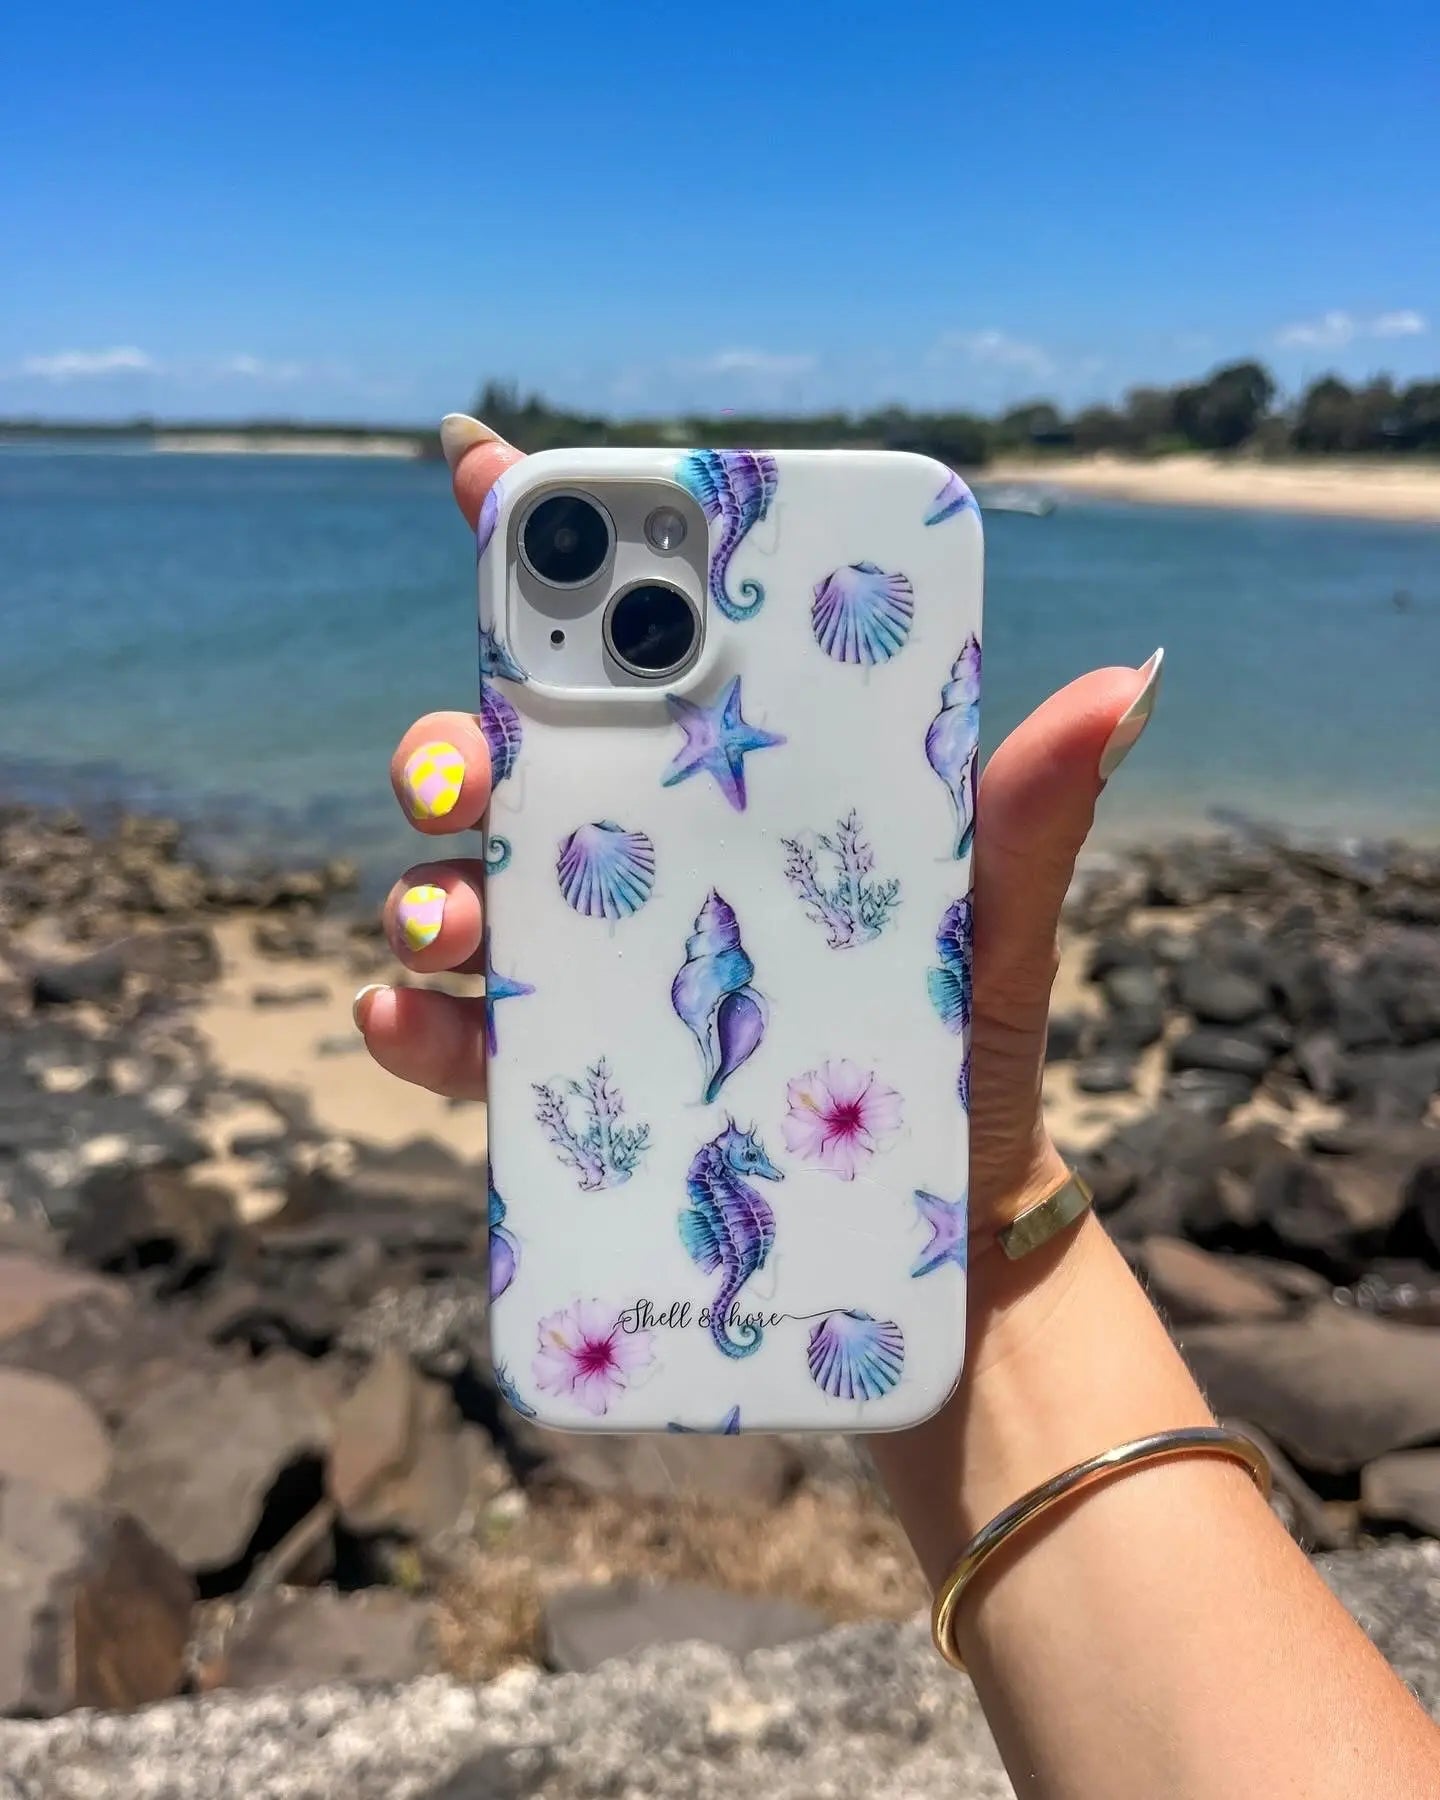 Floral Reef iPhone case Shell And Shore